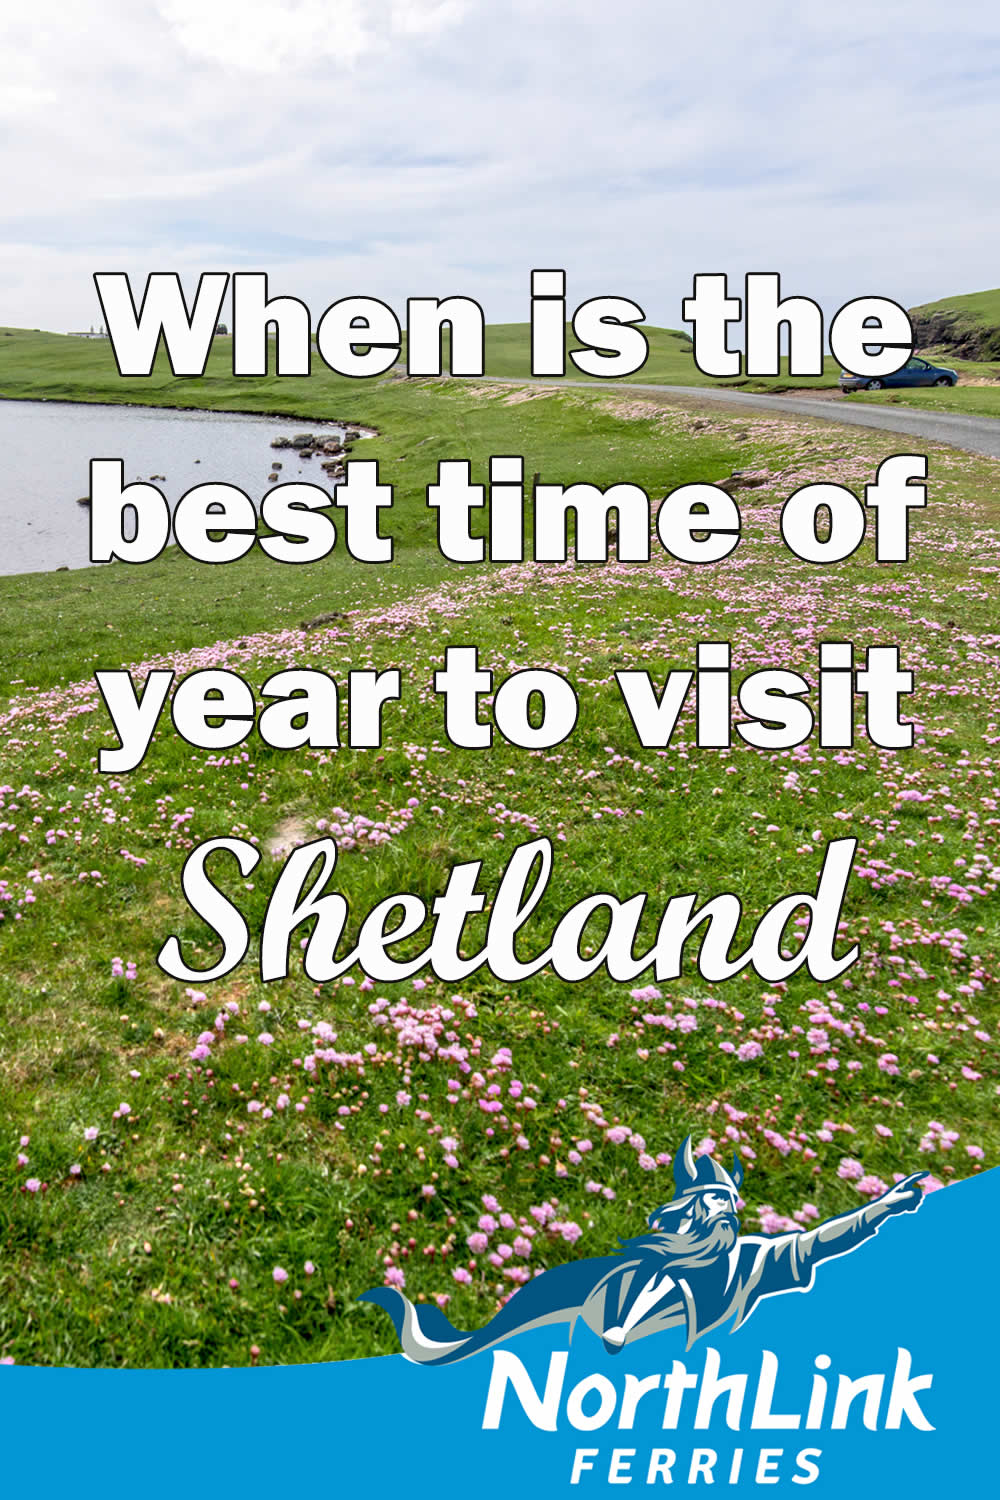 When is the best time of year to visit Shetland?